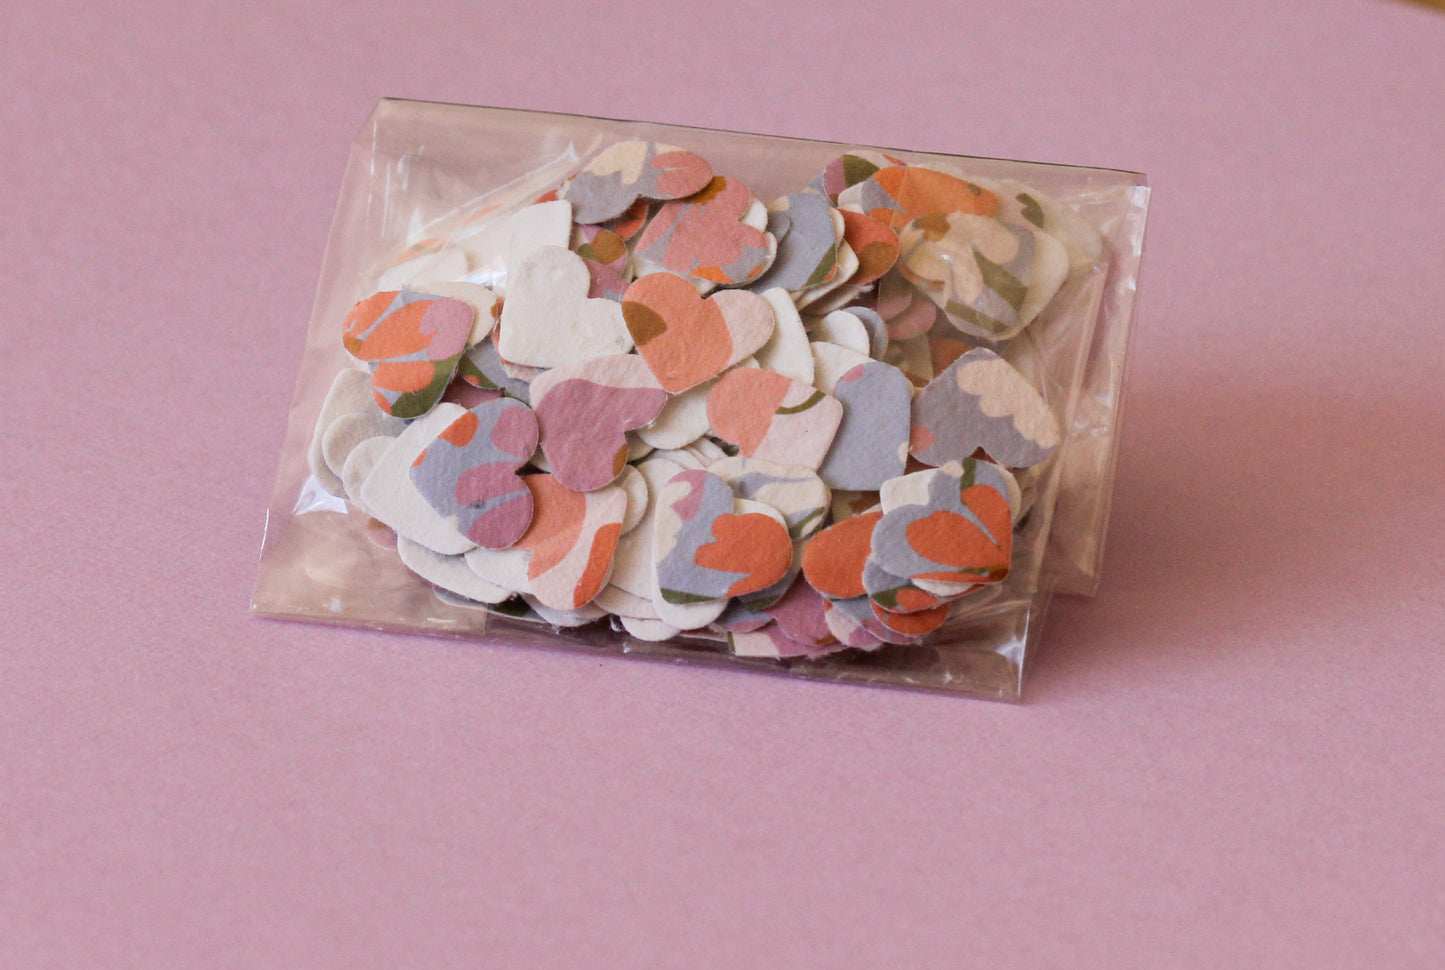 Plantable seeded paper confetti - Flower Bomb [Limited Edition]